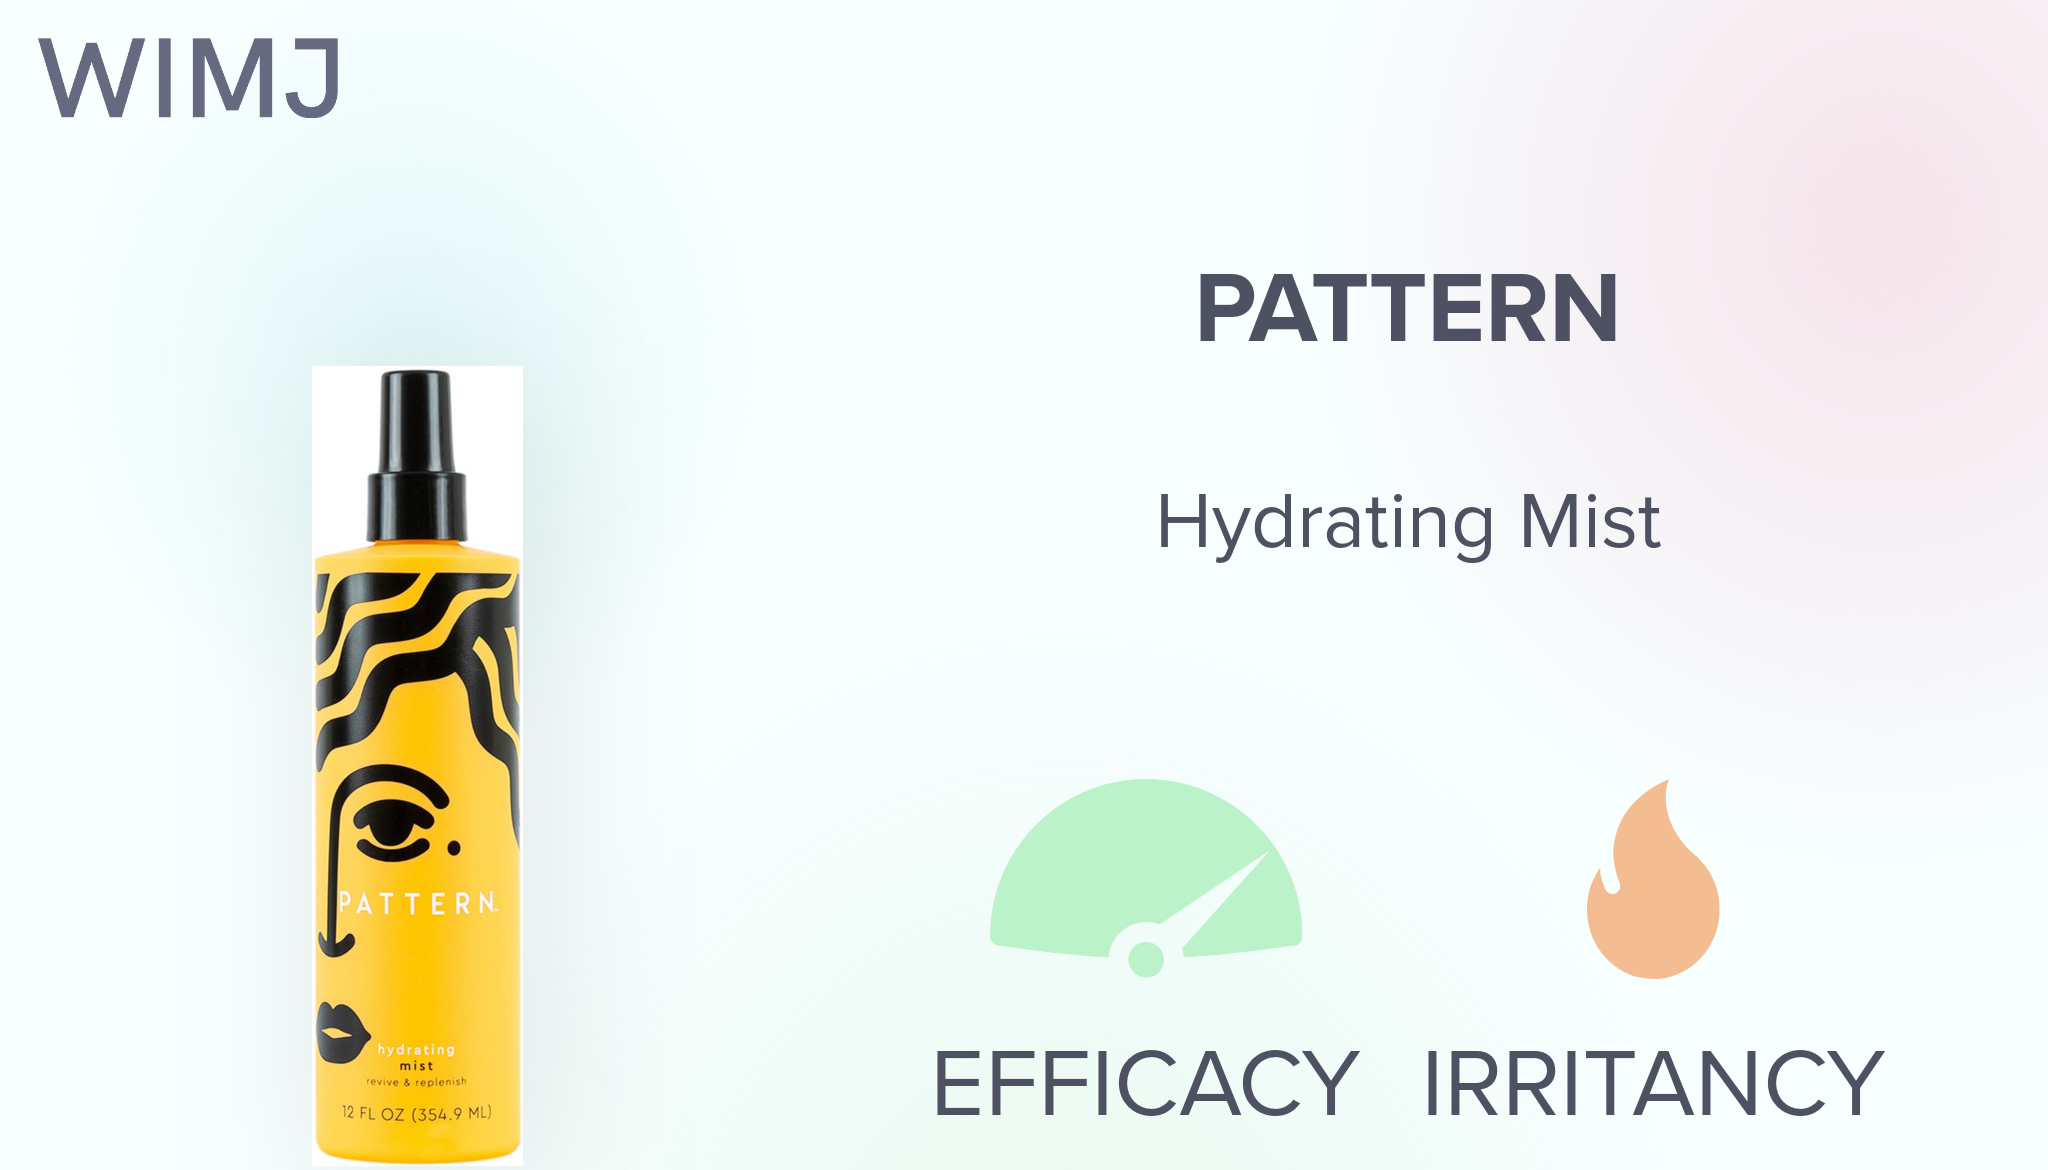 Review: PATTERN - Hydrating Mist - WIMJ